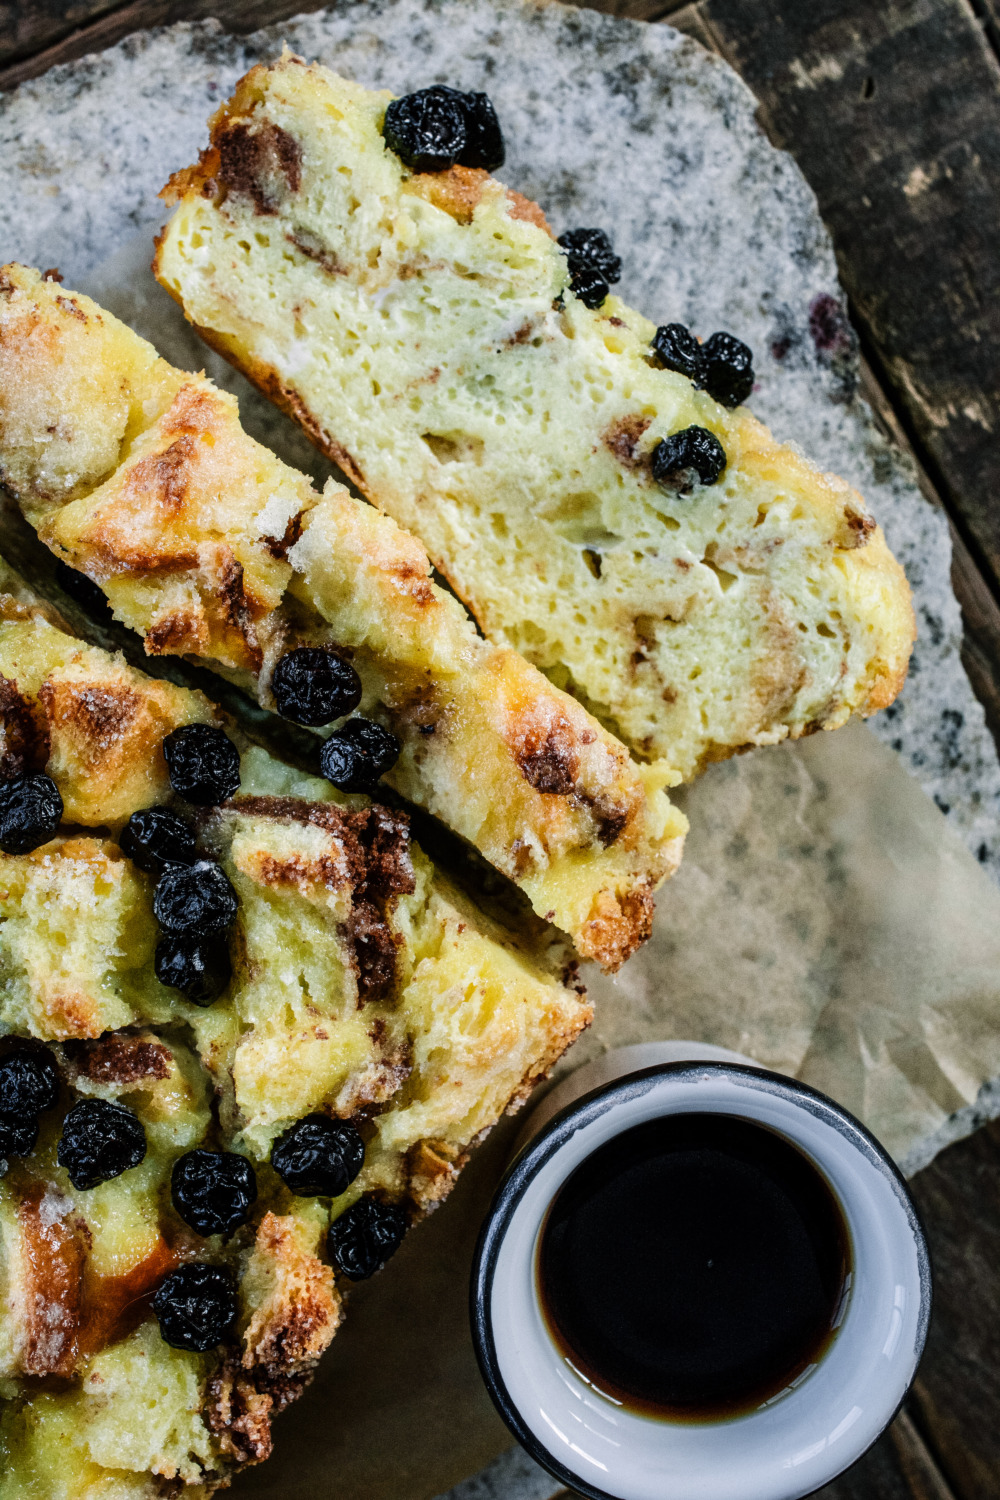 Restaurant-Style Cinnamon Bread Pudding with Blueberries